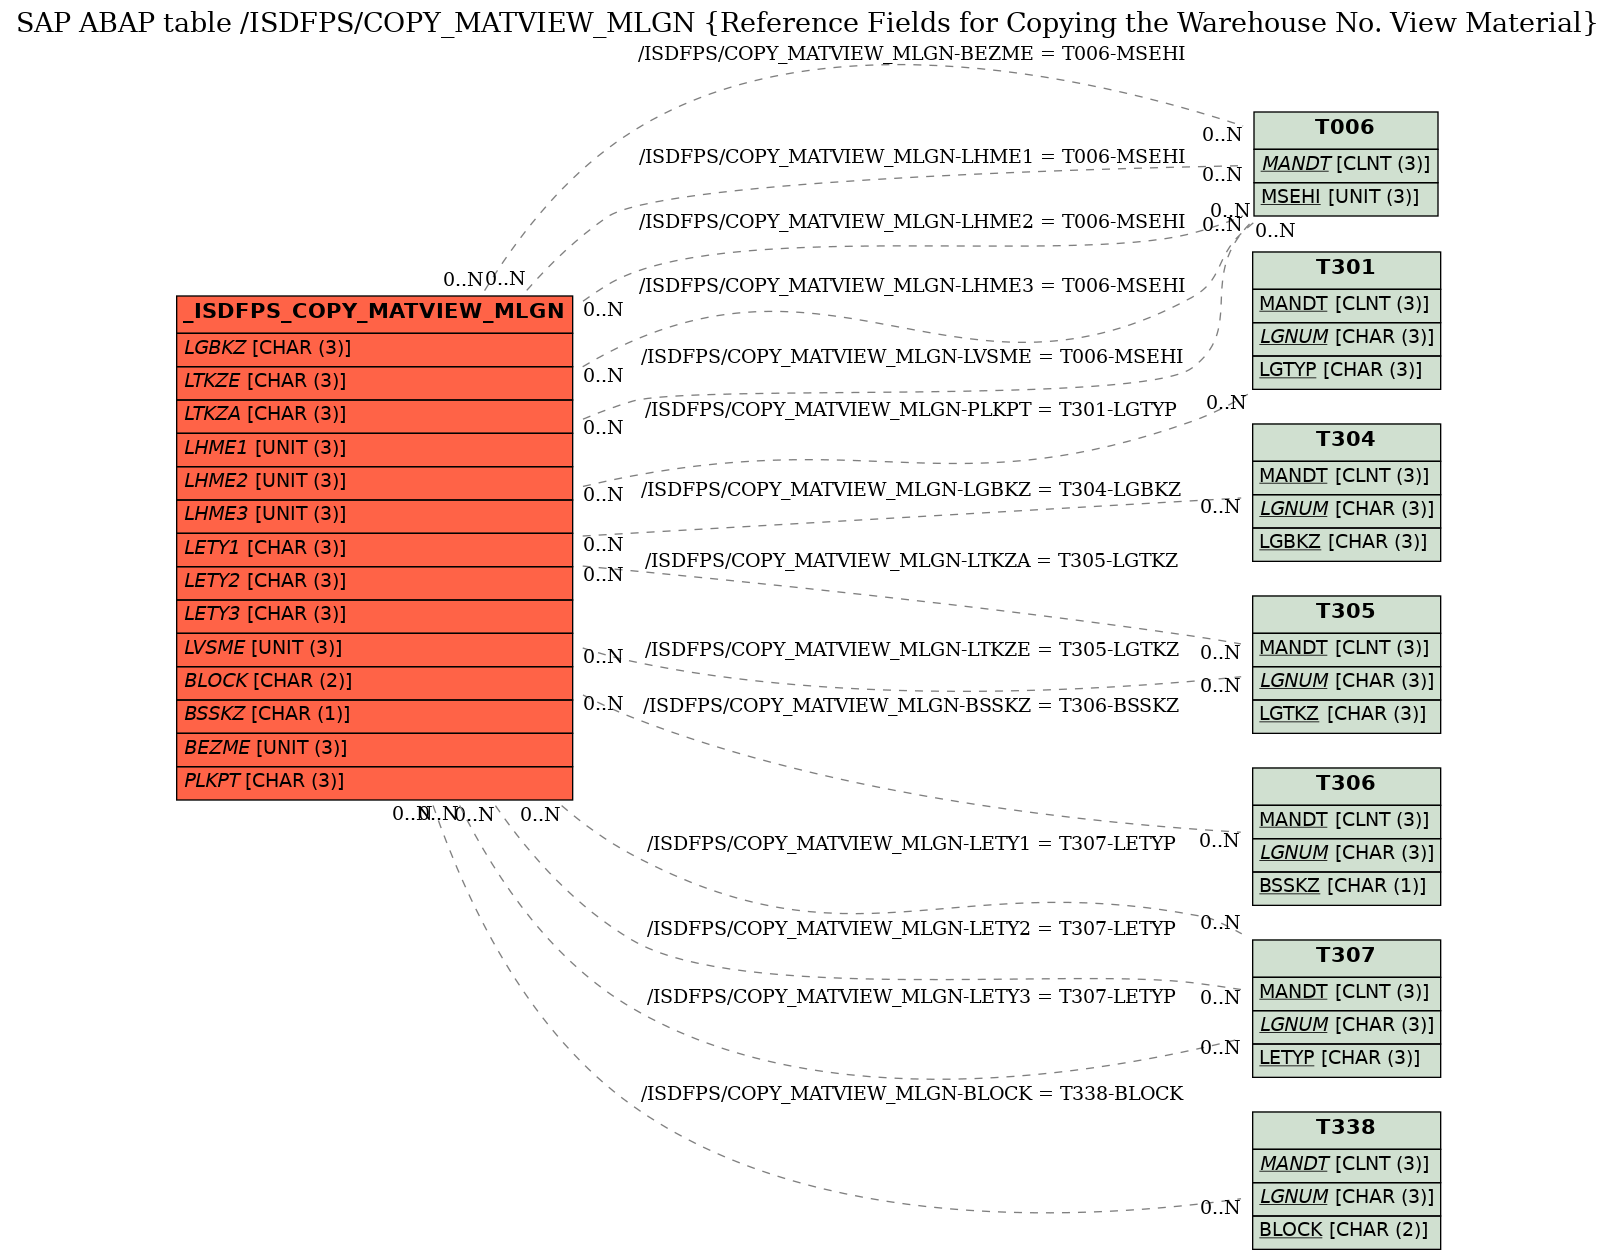 E-R Diagram for table /ISDFPS/COPY_MATVIEW_MLGN (Reference Fields for Copying the Warehouse No. View Material)